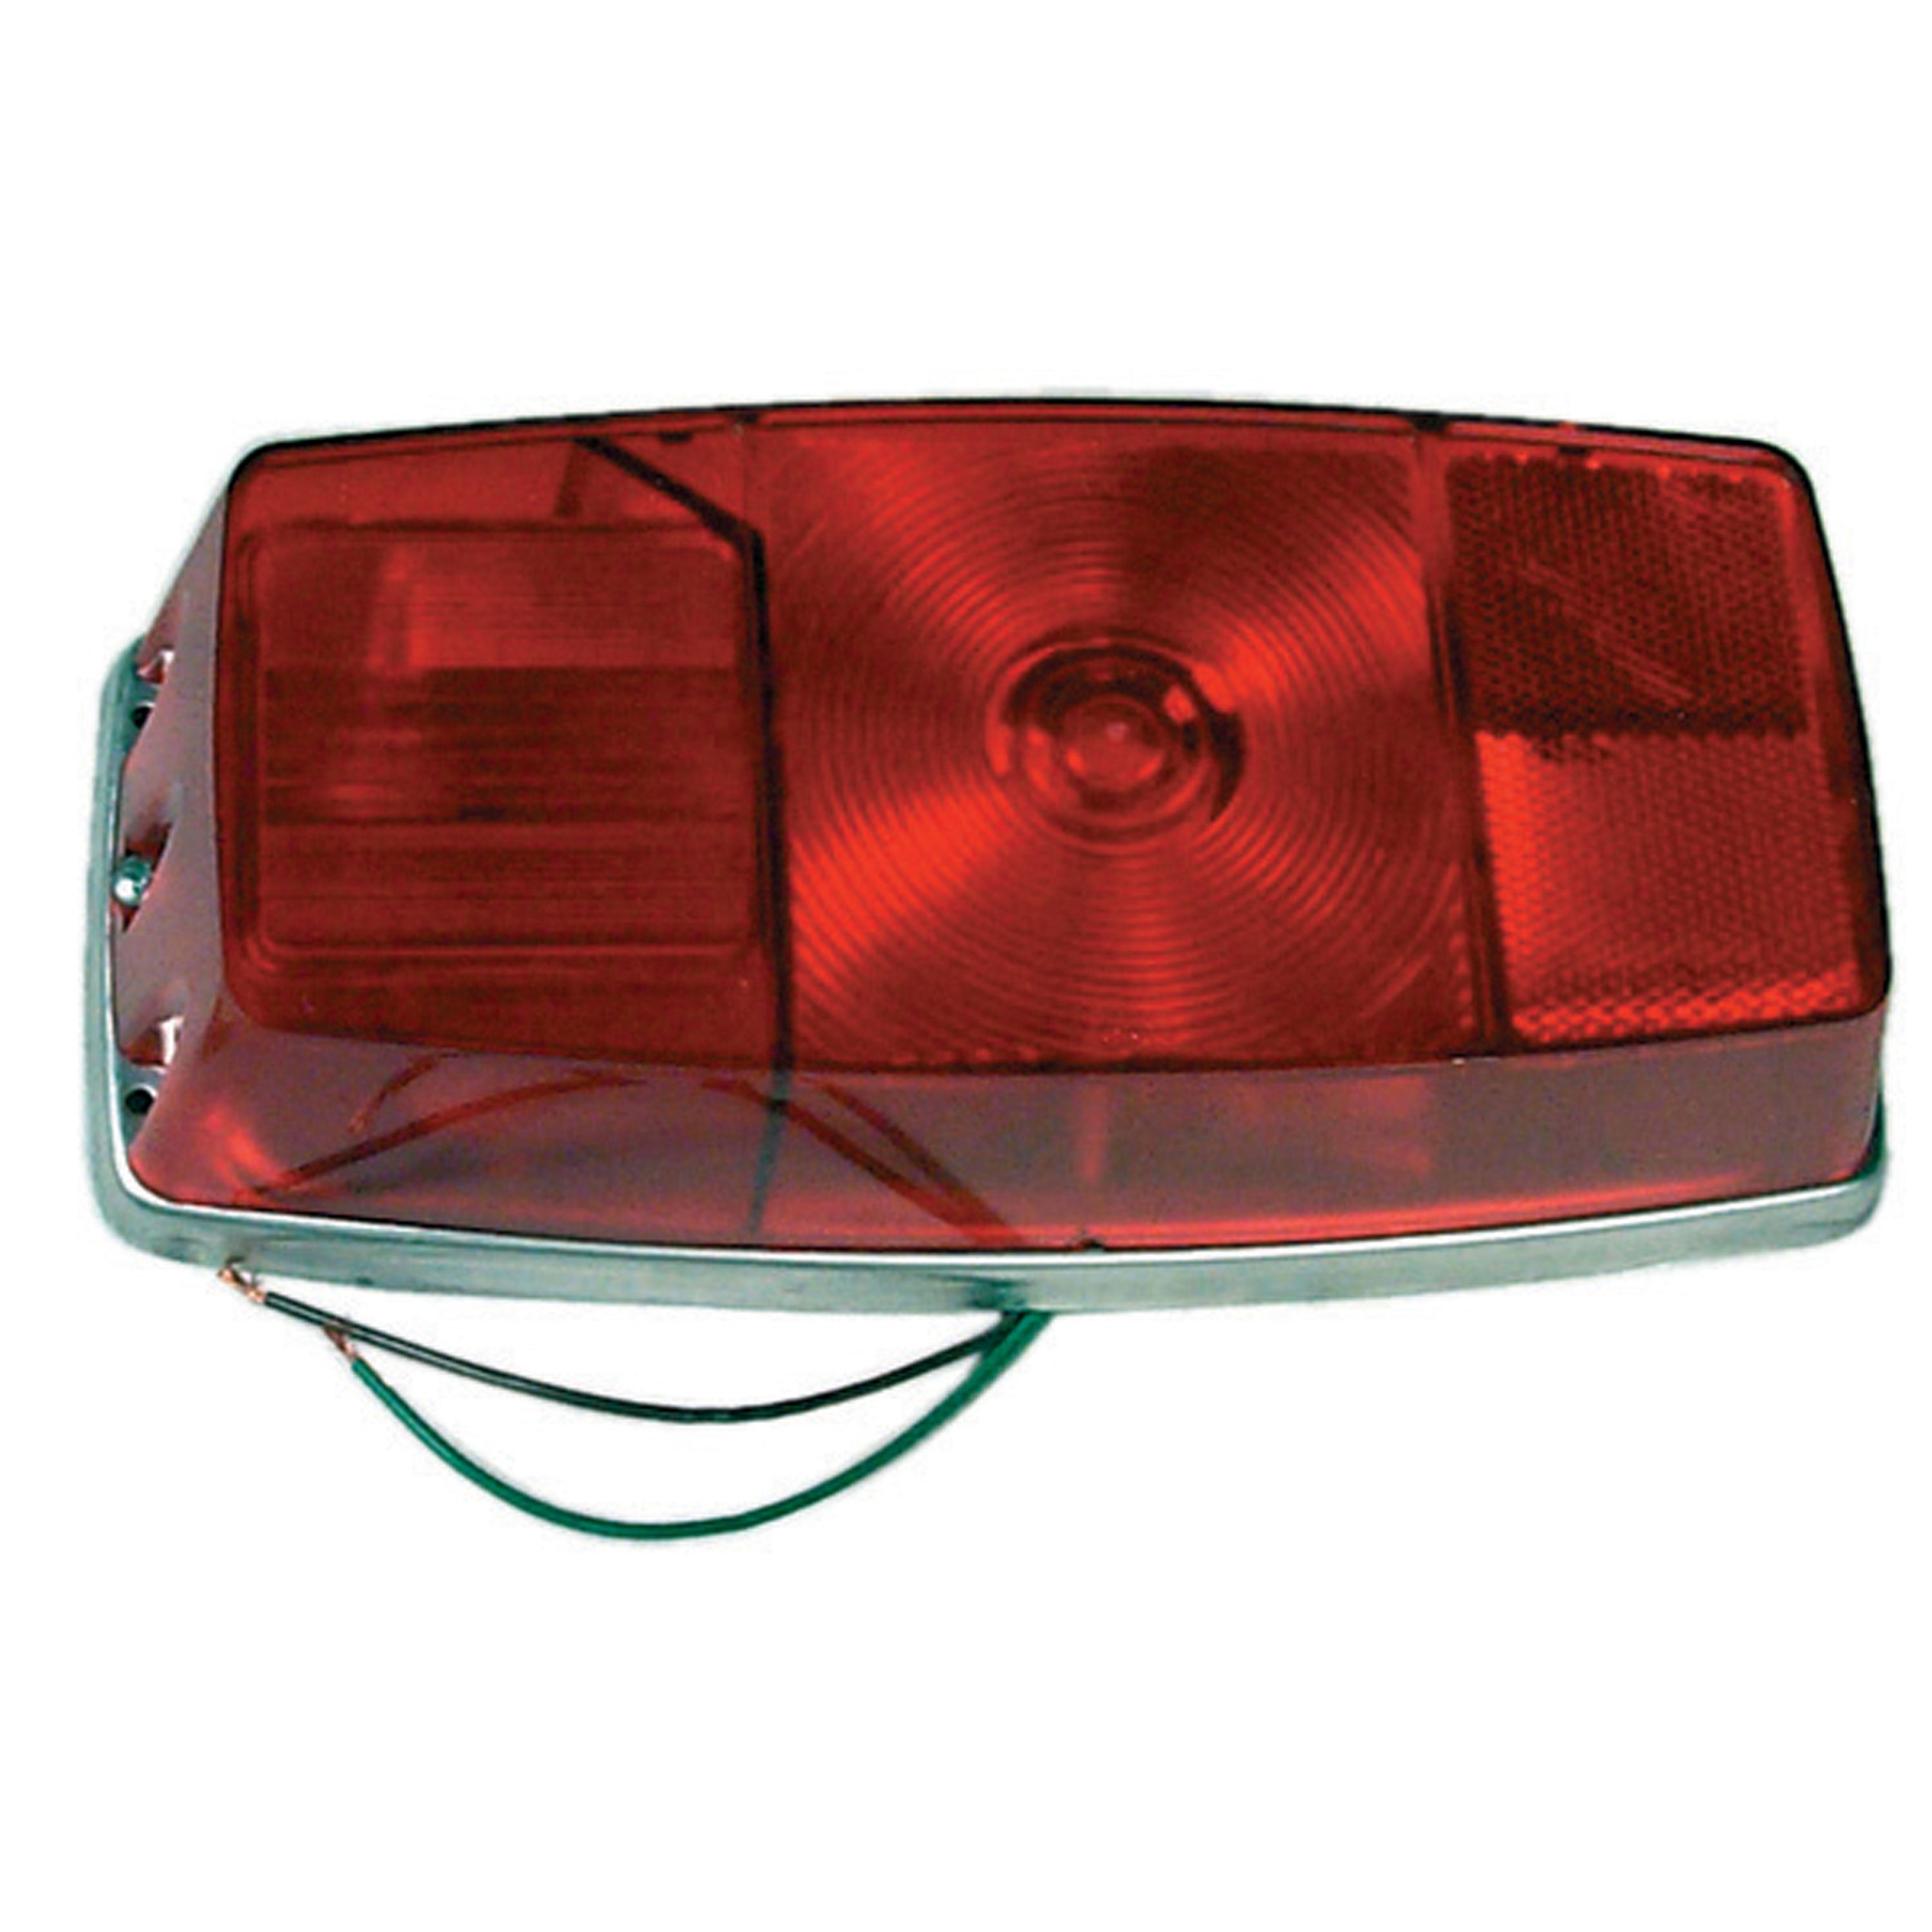 Bargman TL343-0300 The 343 Series Tail Light - Red Lens